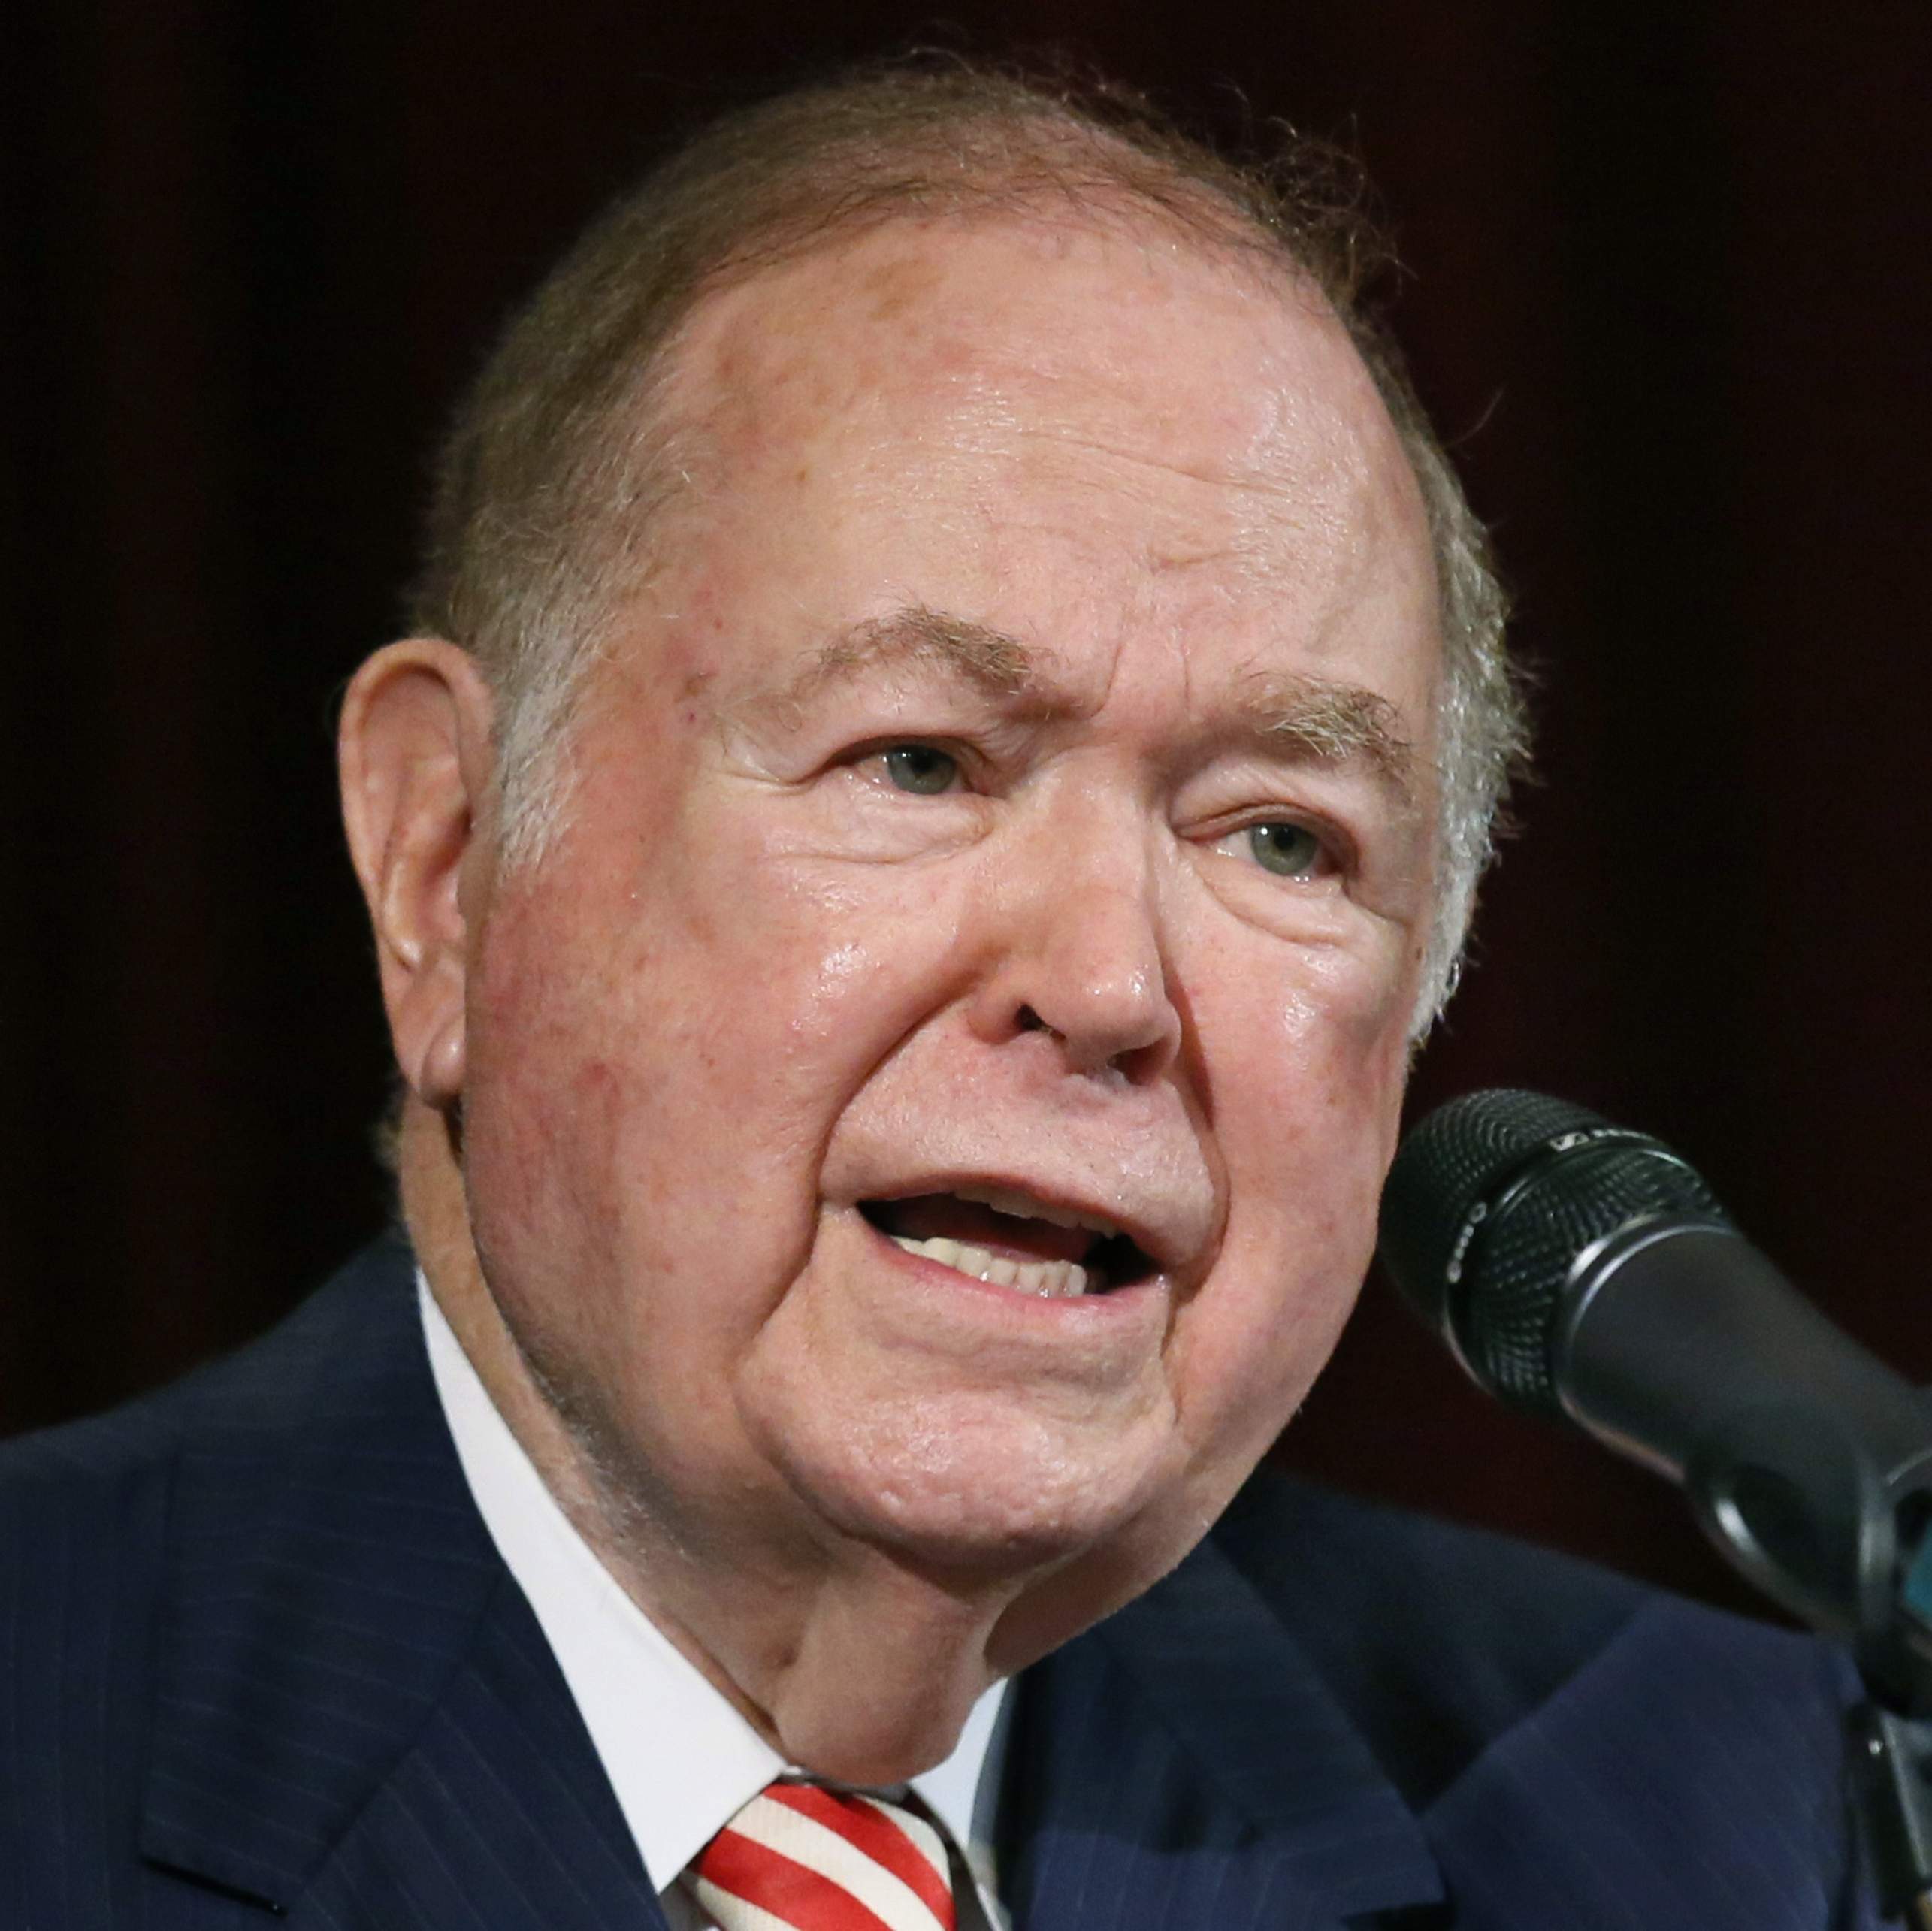 Former federal prosecutor to oversee state’s case against Boren